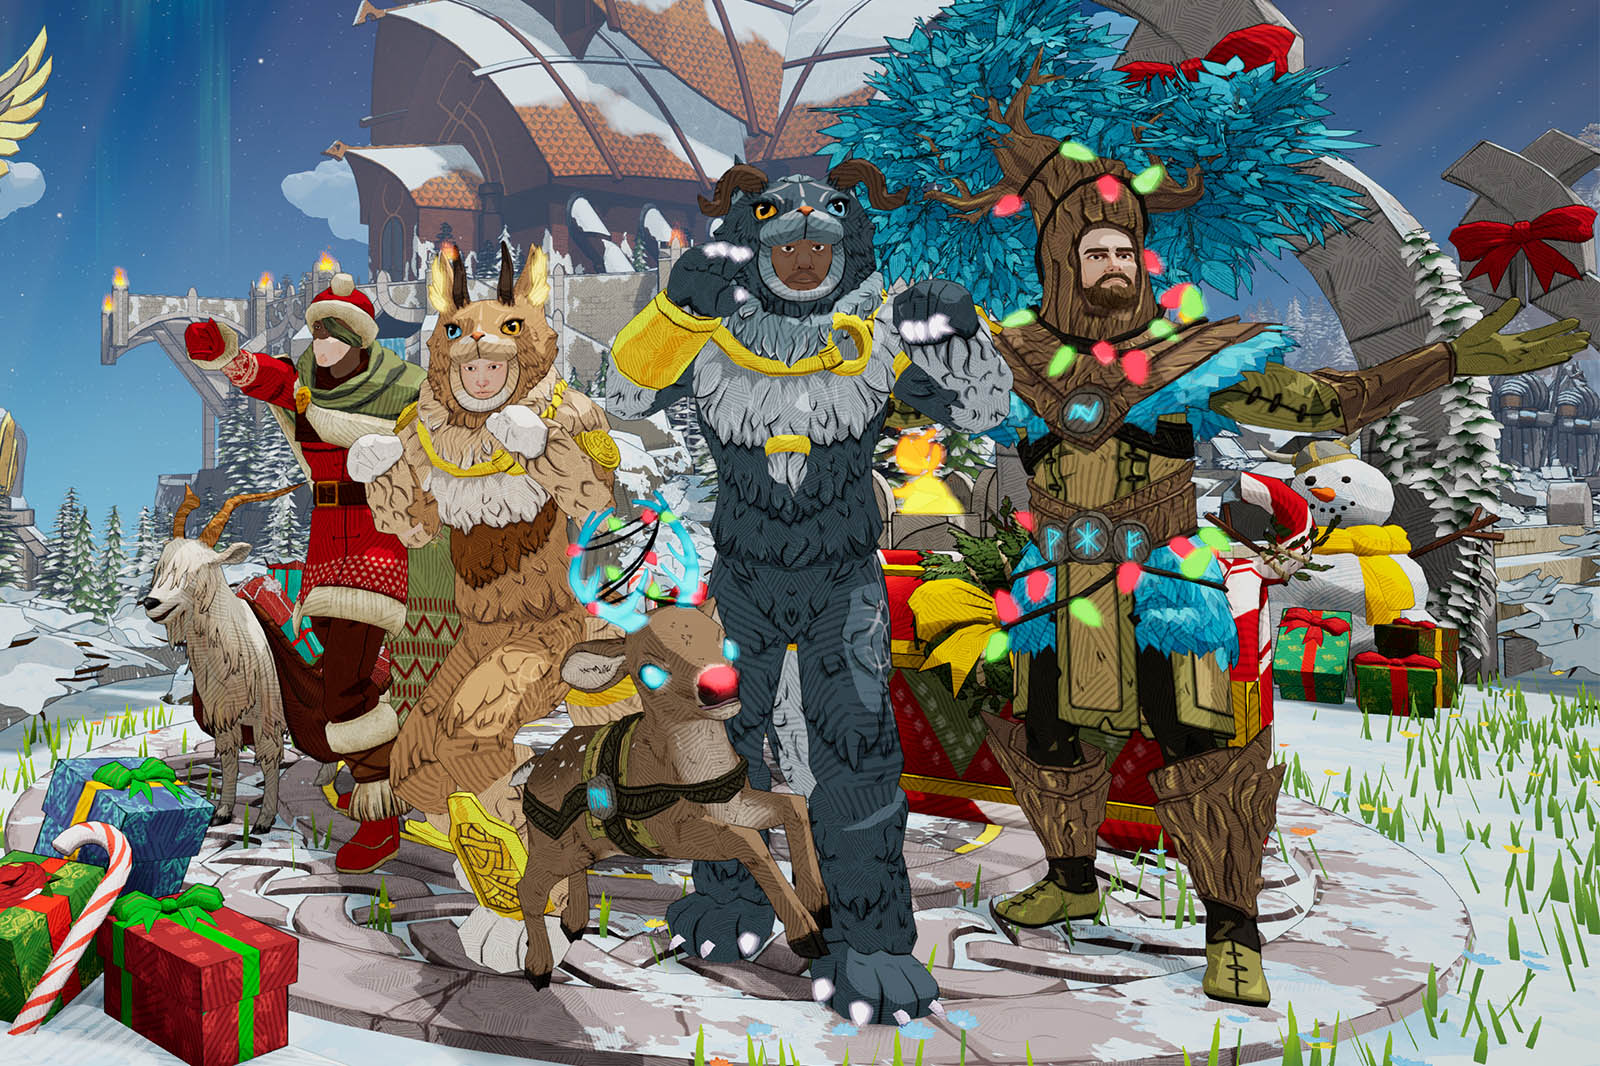 The Yulidays Festive Event has begun! – December 13th to January 2nd 